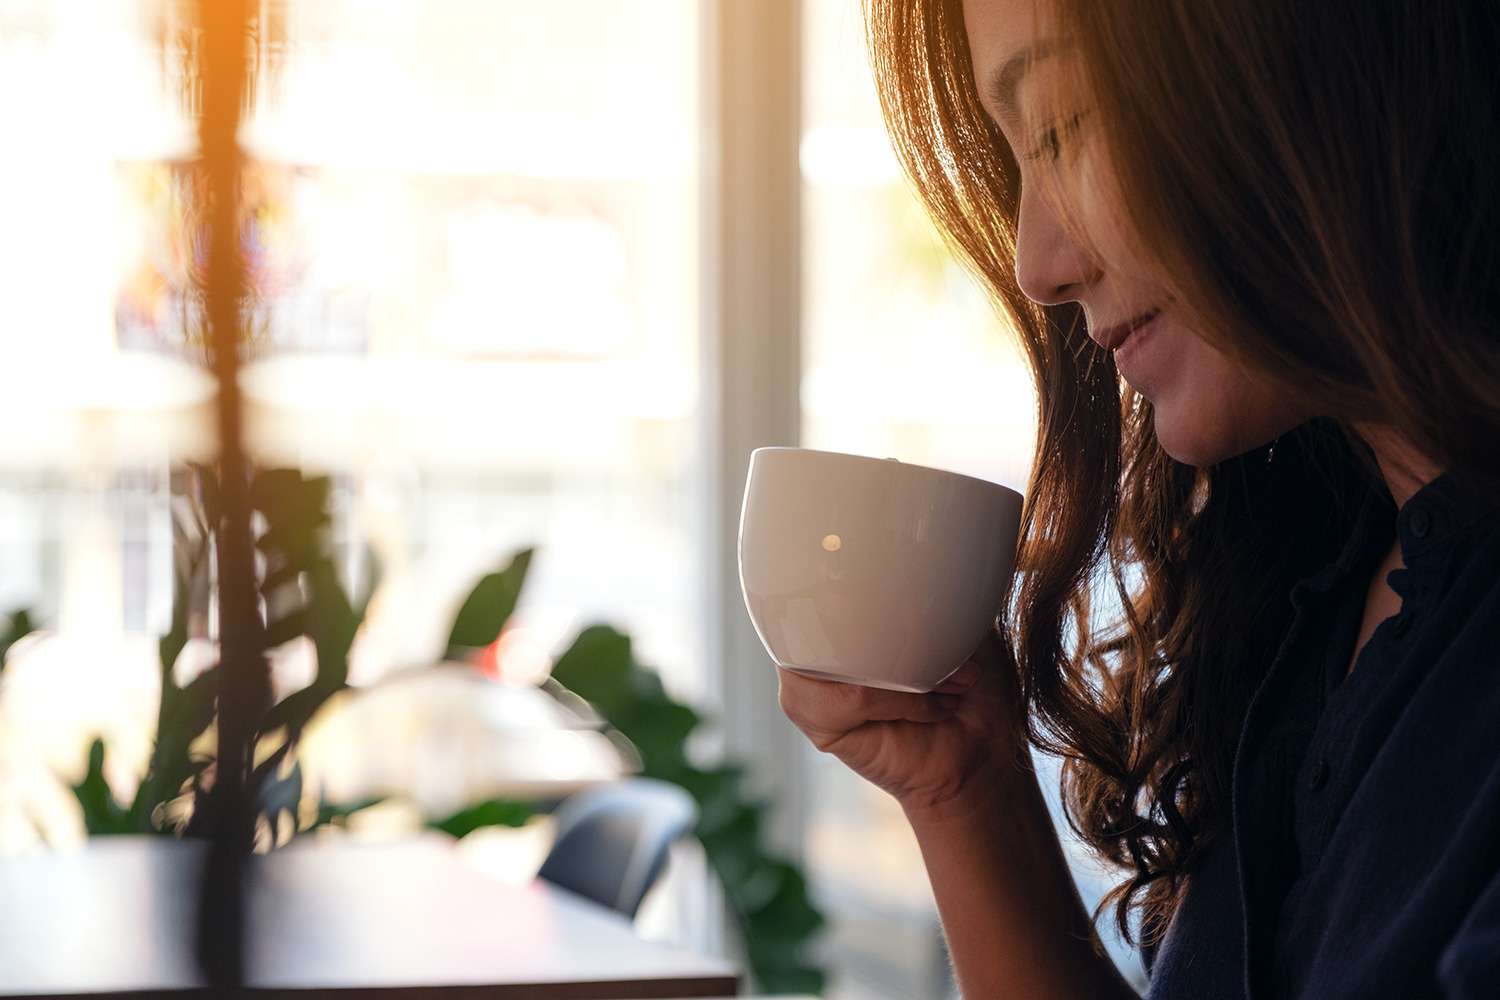 An image of a woman drinking from a mug and smiling from a blog post on the benefits of using a continuous glucose monitor.